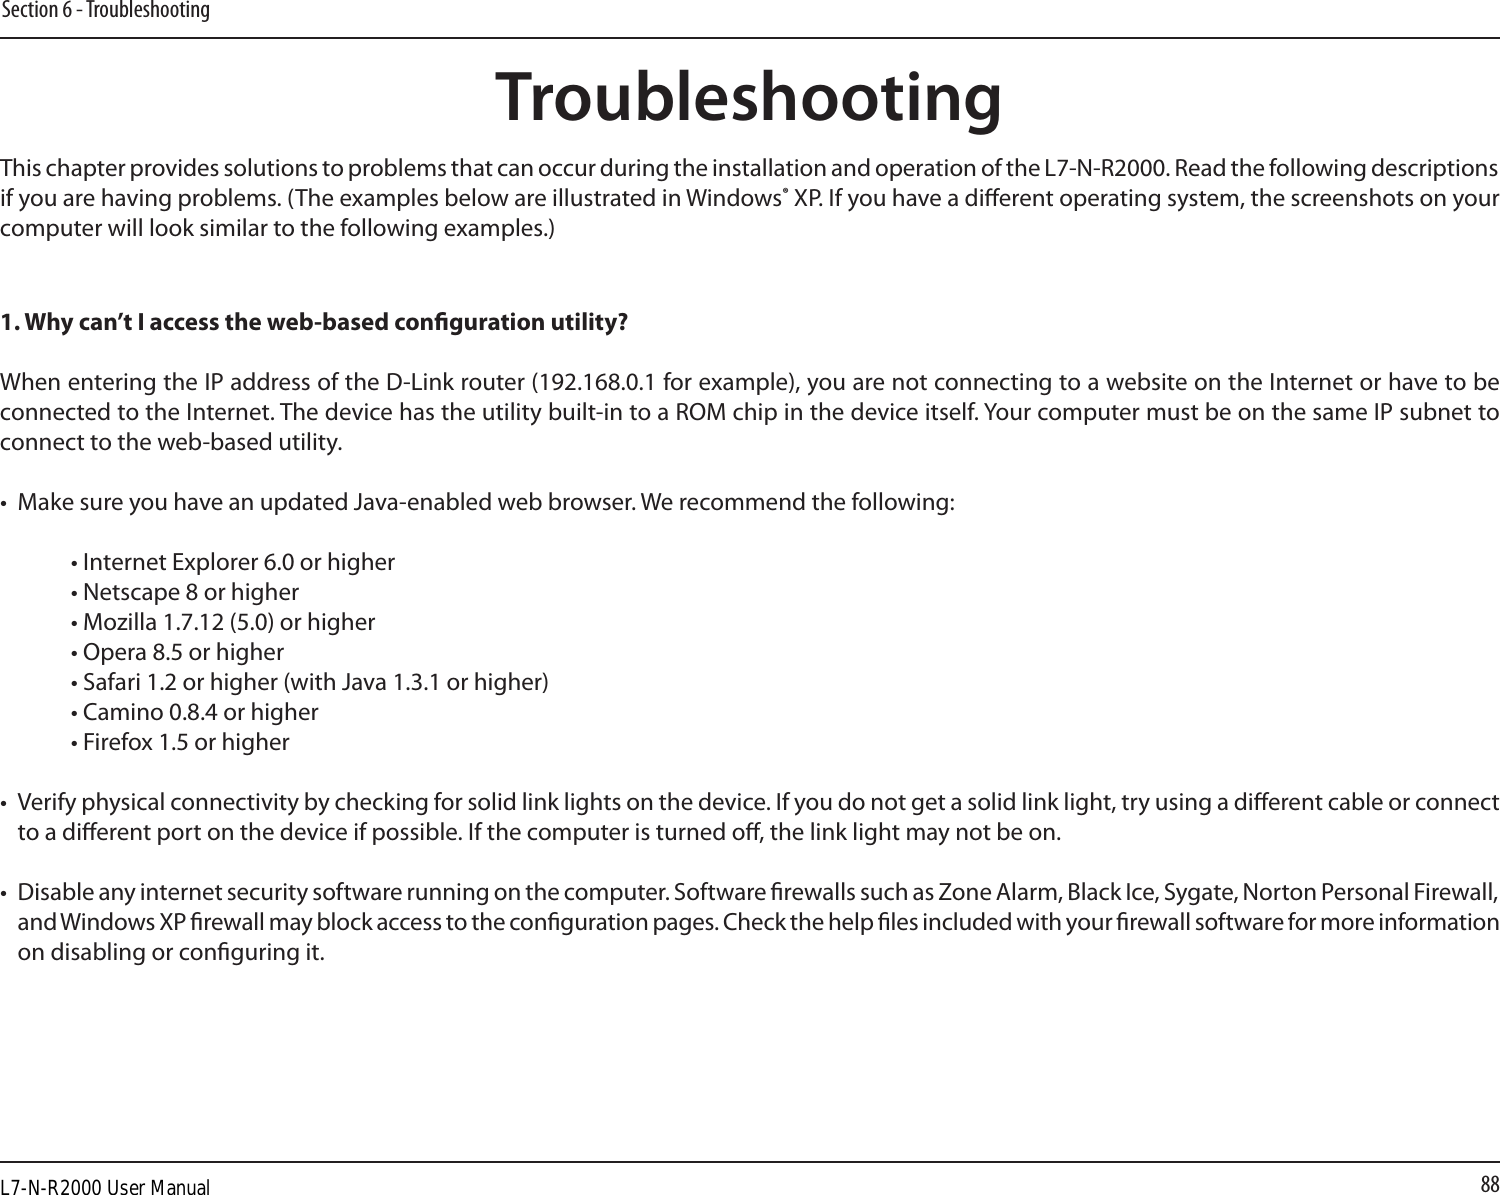 88Section 6 - TroubleshootingTroubleshootingThis chapter provides solutions to problems that can occur during the installation and operation of the L7-N-R2000. Read the following descriptions if you are having problems. (The examples below are illustrated in Windows® XP. If you have a dierent operating system, the screenshots on your computer will look similar to the following examples.)1. Why can’t I access the web-based conguration utility?When entering the IP address of the D-Link router (192.168.0.1 for example), you are not connecting to a website on the Internet or have to be connected to the Internet. The device has the utility built-in to a ROM chip in the device itself. Your computer must be on the same IP subnet to connect to the web-based utility. •  Make sure you have an updated Java-enabled web browser. We recommend the following: • Internet Explorer 6.0 or higher • Netscape 8 or higher • Mozilla 1.7.12 (5.0) or higher • Opera 8.5 or higher • Safari 1.2 or higher (with Java 1.3.1 or higher) • Camino 0.8.4 or higher • Firefox 1.5 or higher •  Verify physical connectivity by checking for solid link lights on the device. If you do not get a solid link light, try using a dierent cable or connect to a dierent port on the device if possible. If the computer is turned o, the link light may not be on.•  Disable any internet security software running on the computer. Software rewalls such as Zone Alarm, Black Ice, Sygate, Norton Personal Firewall, and Windows XP rewall may block access to the conguration pages. Check the help les included with your rewall software for more information on disabling or conguring it.L7-N-R2000 User Manual